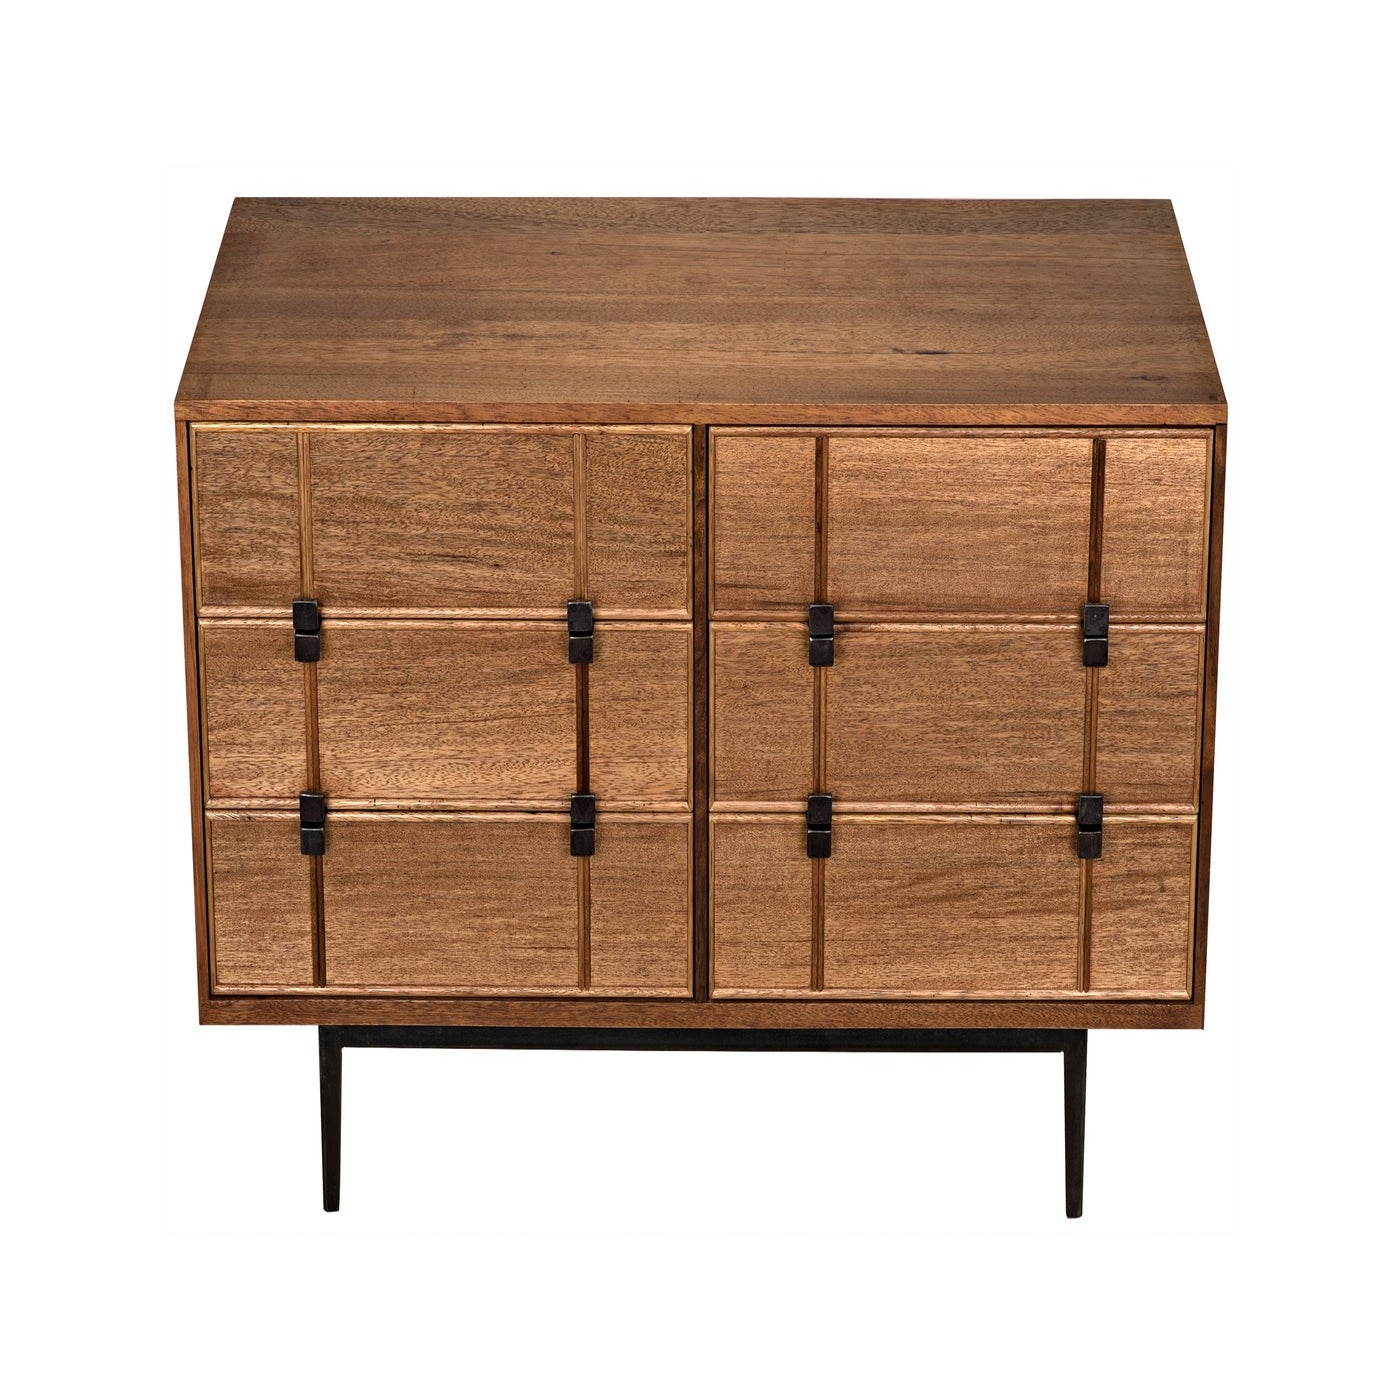 Steel Walnut - dressers & Bourgeois (noir) Noir Trading, Sideboard, and consoles | sideboards